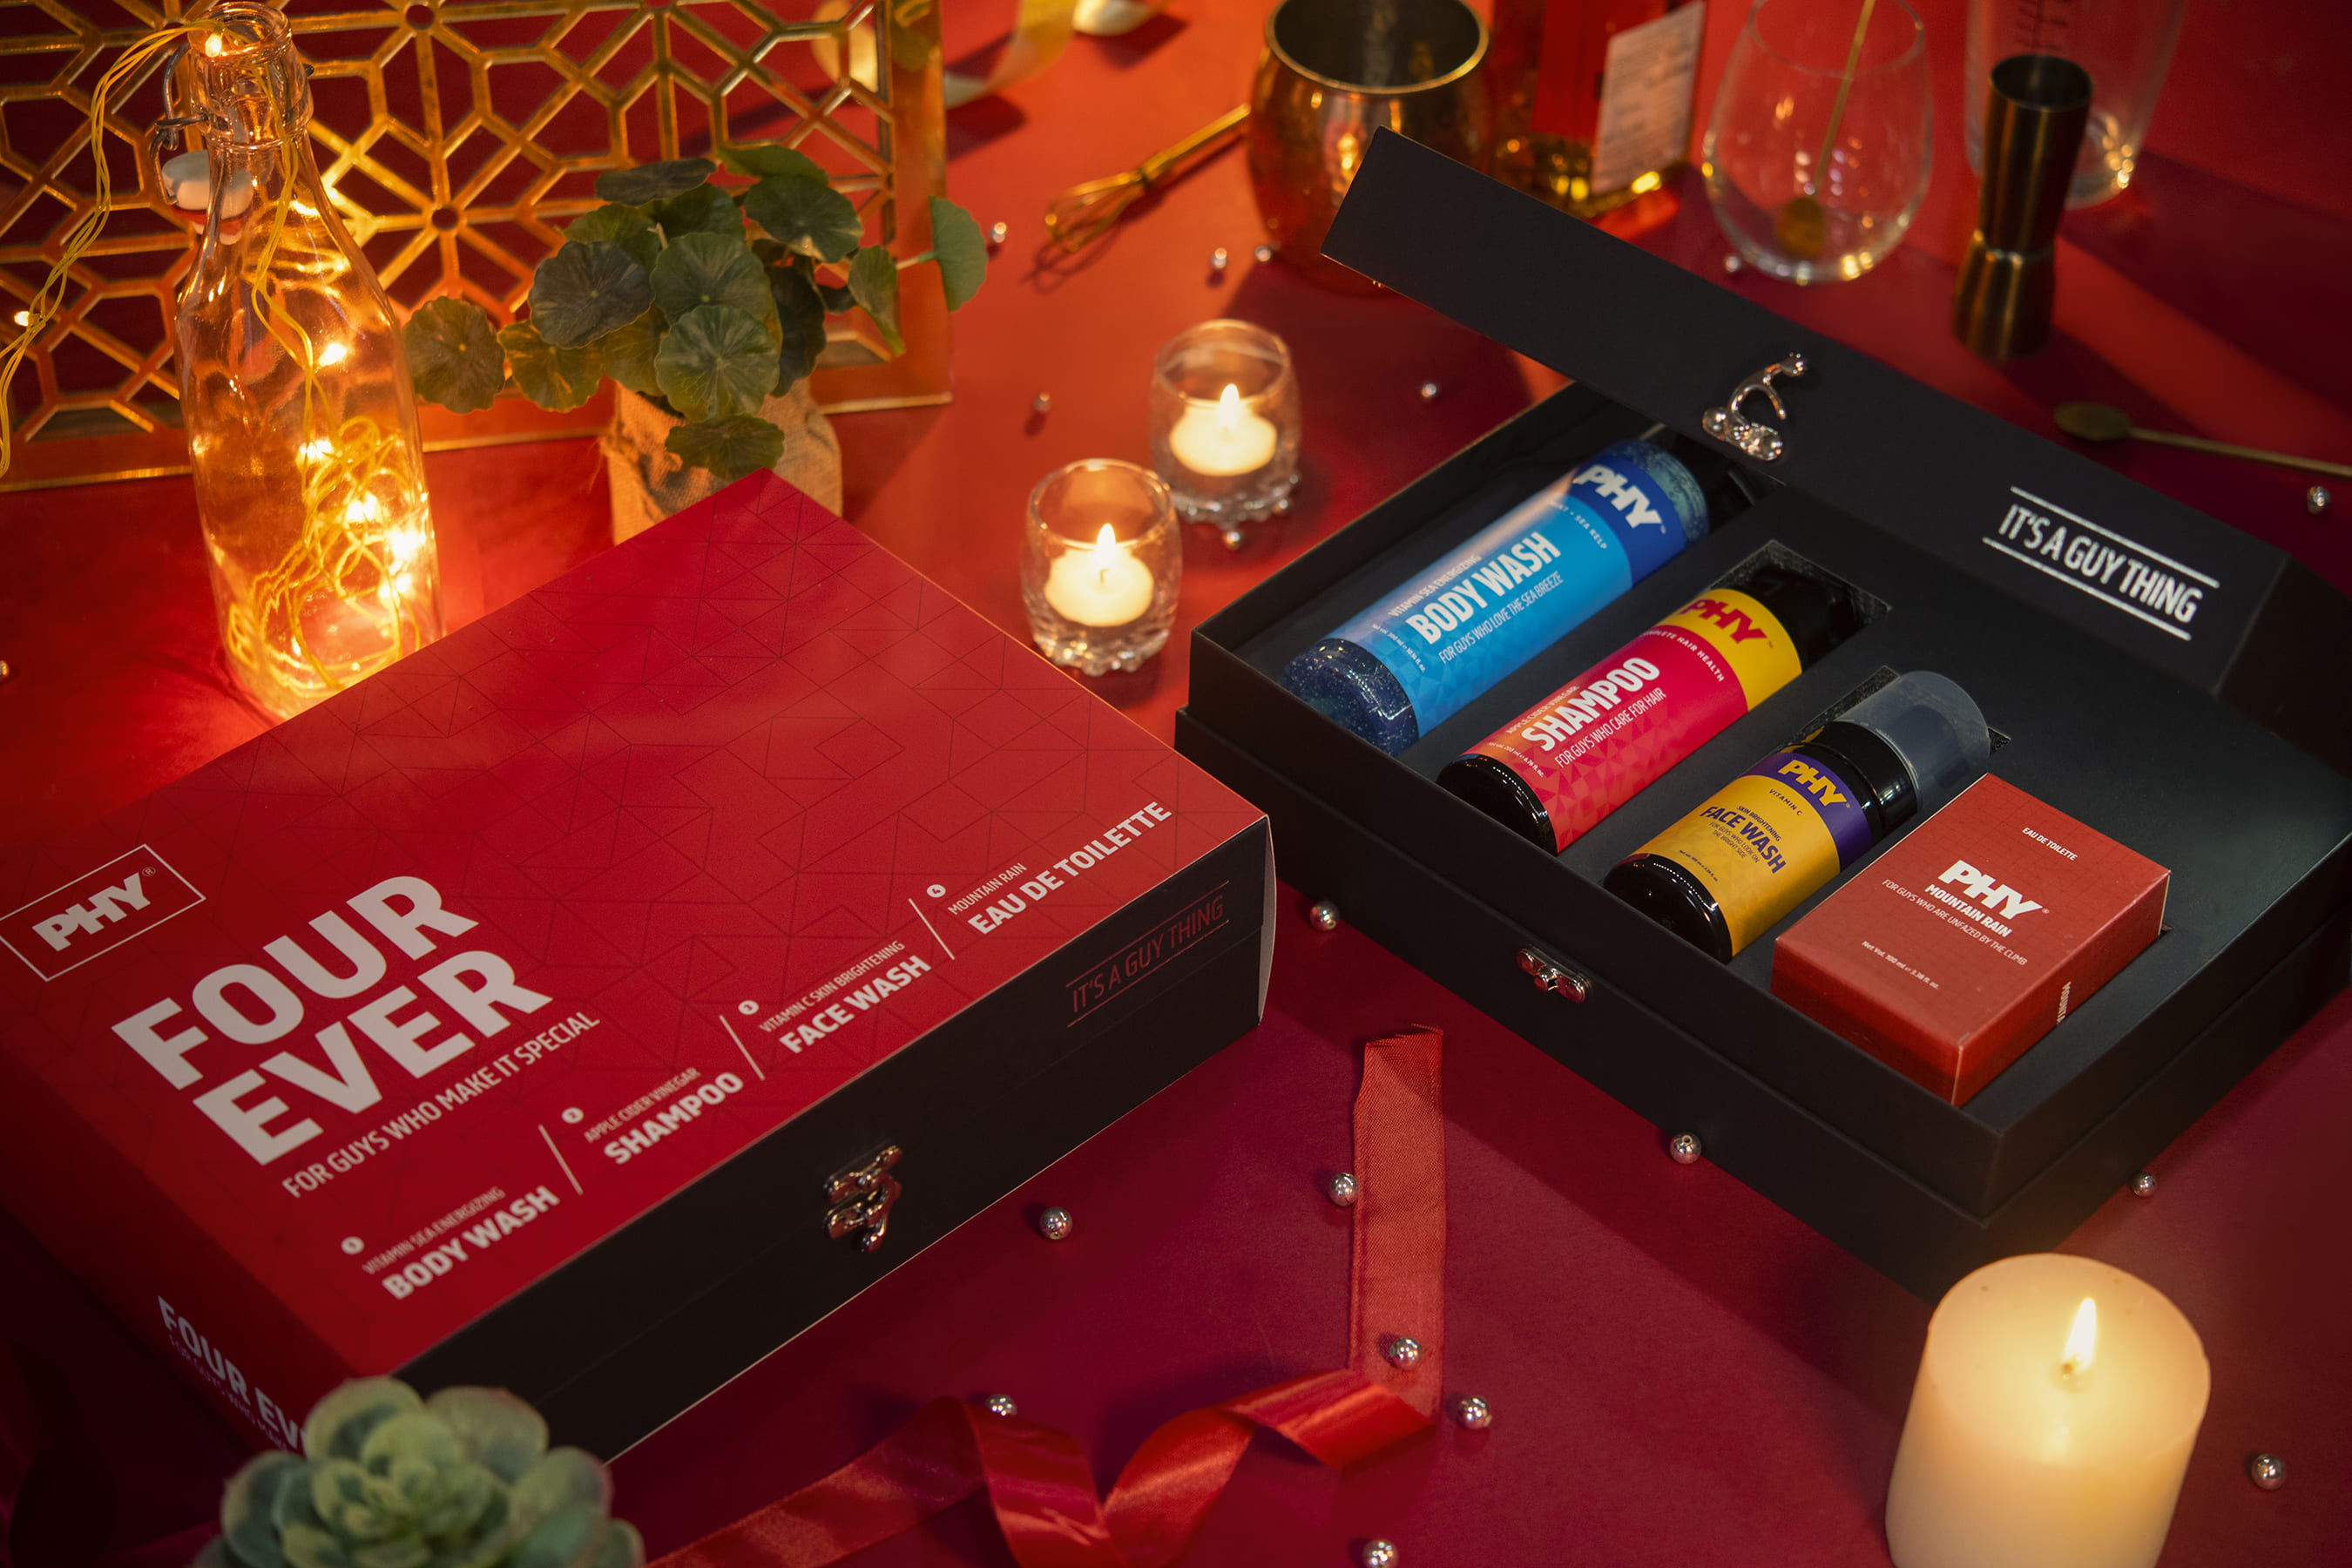 Perfect for gifting, PHY launches a special, limited-edition festive gift box